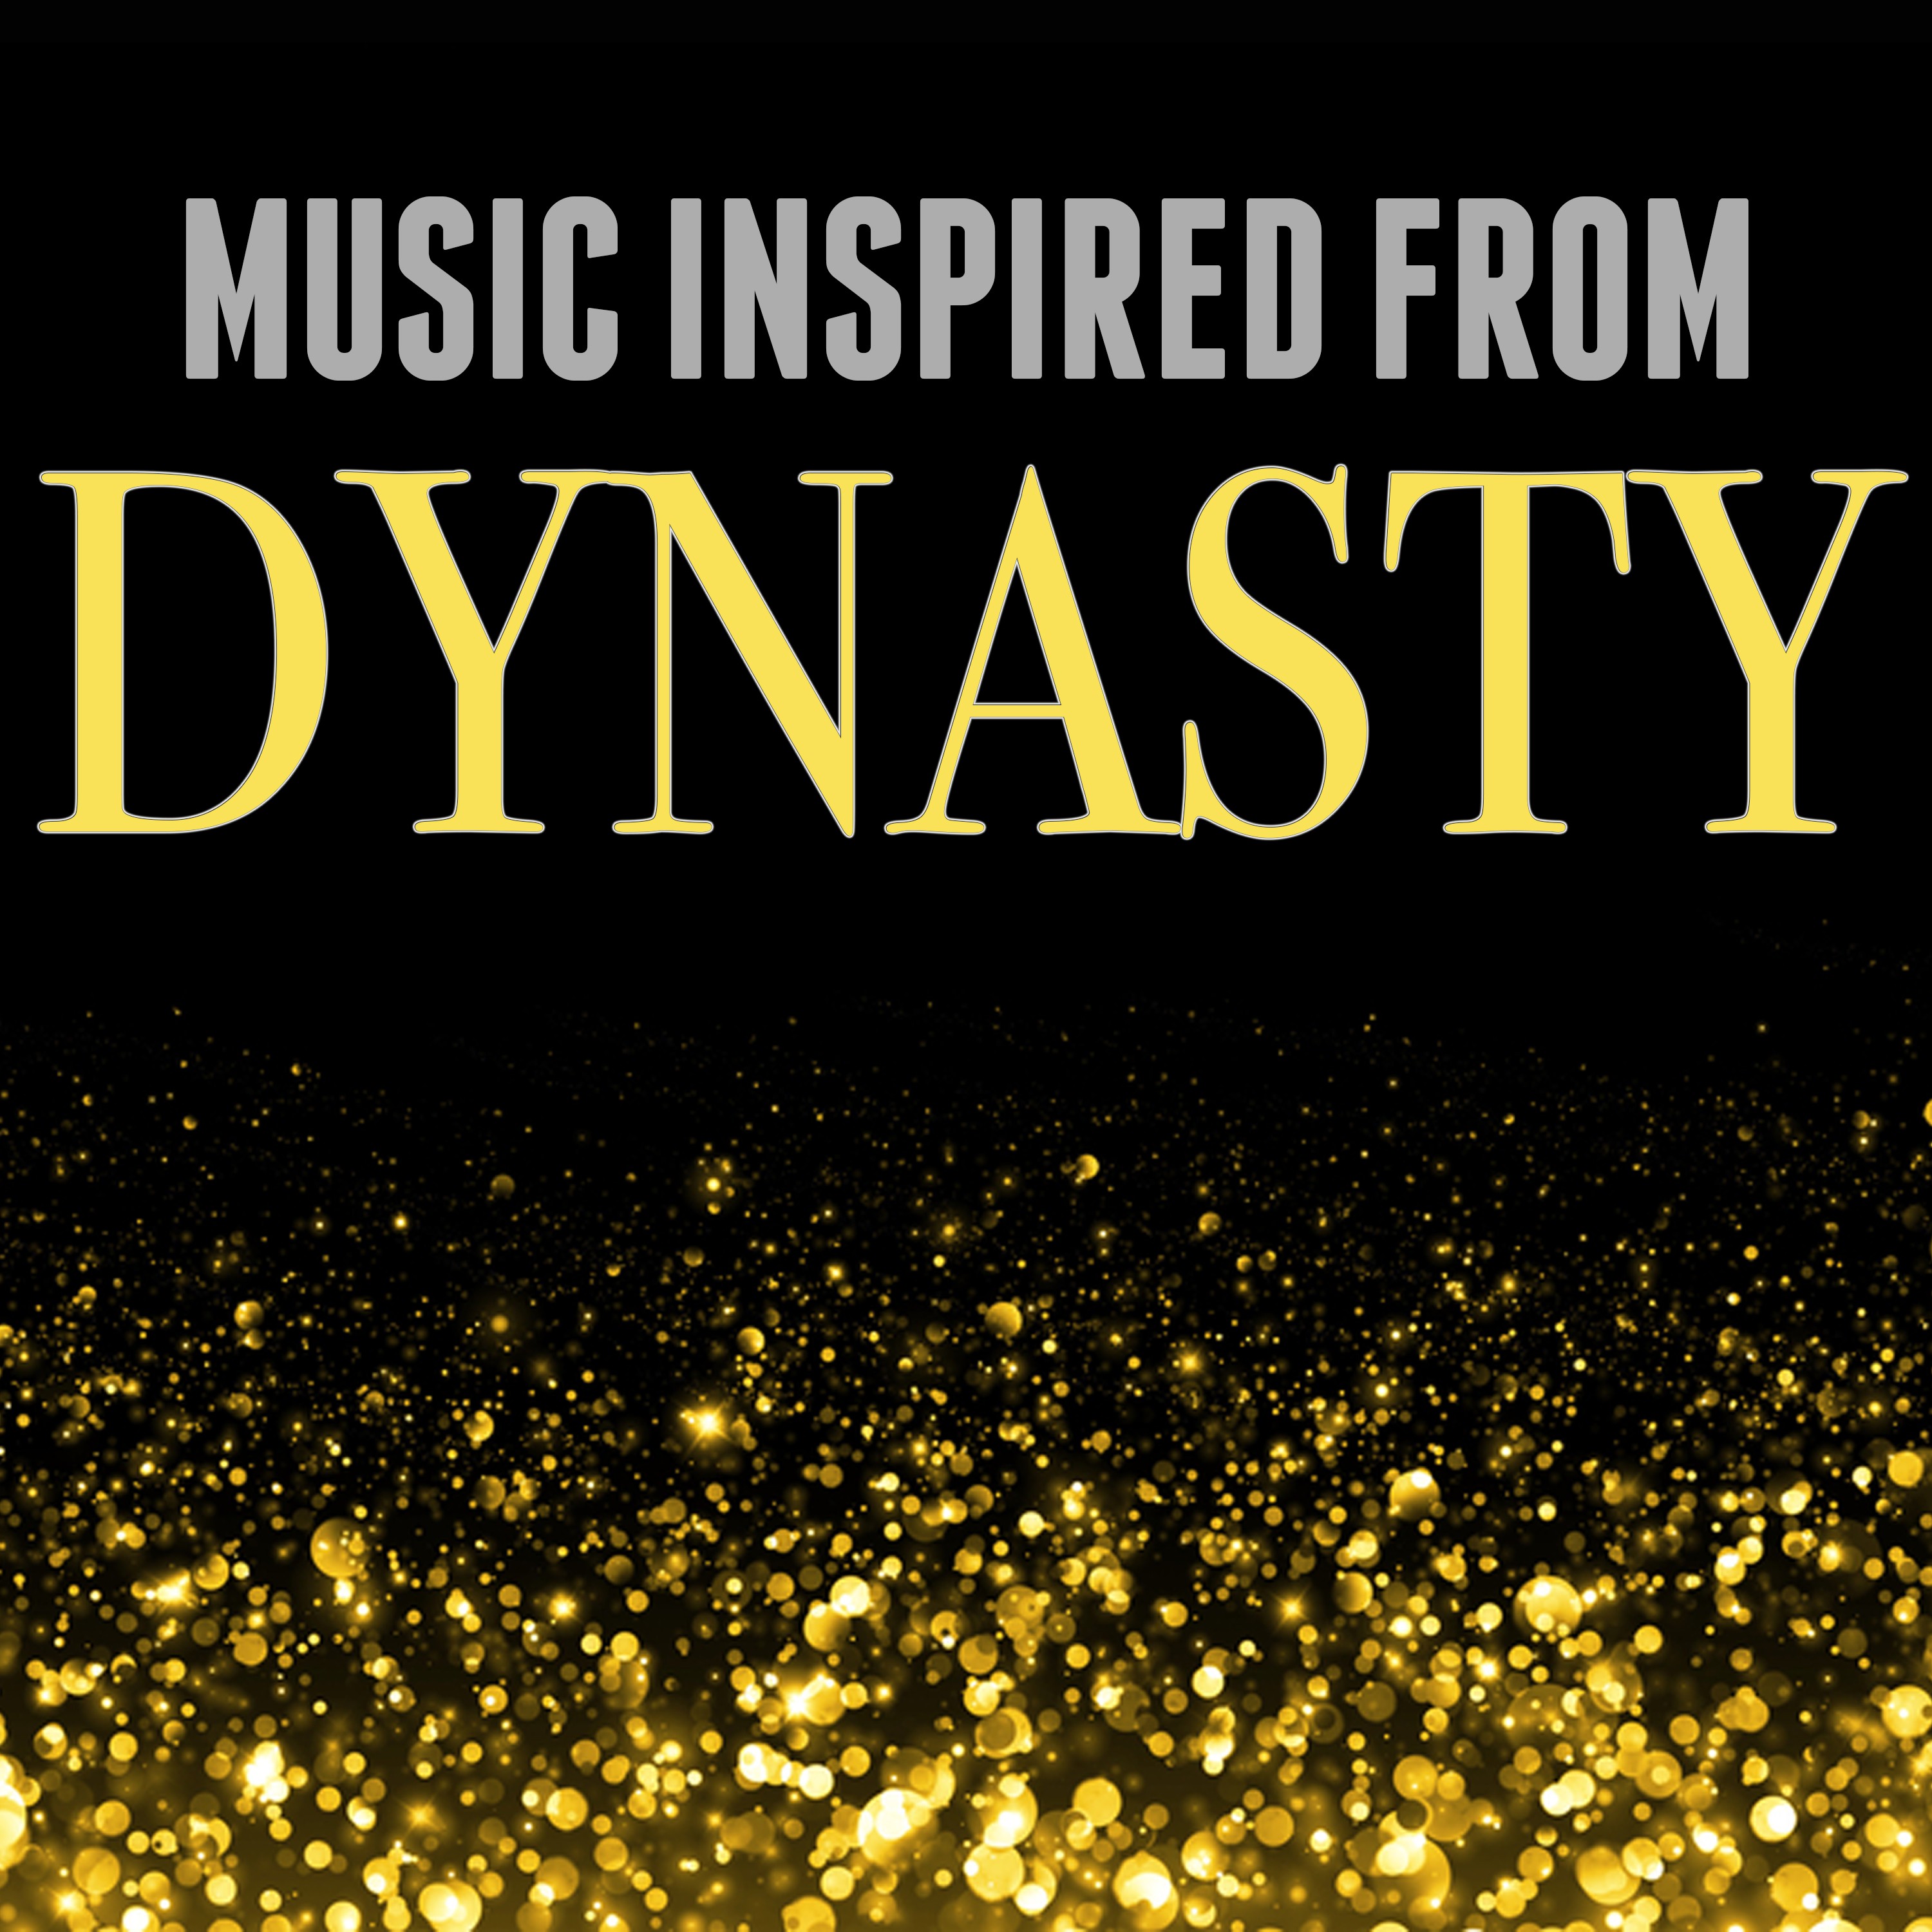 Music Inspired from Dynasty